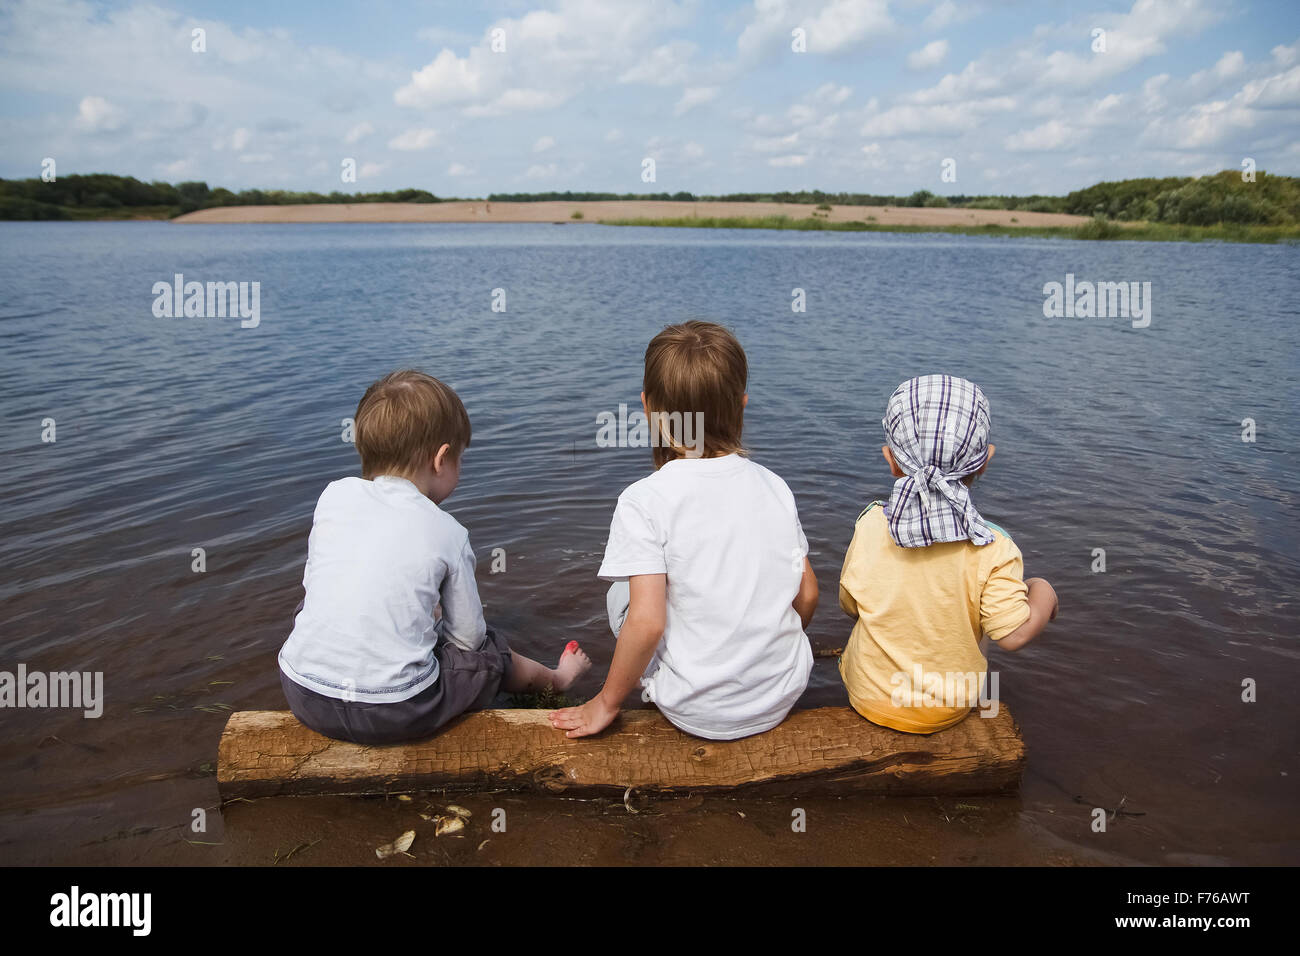 three boys sitting on the Bank of the lake Stock Photo